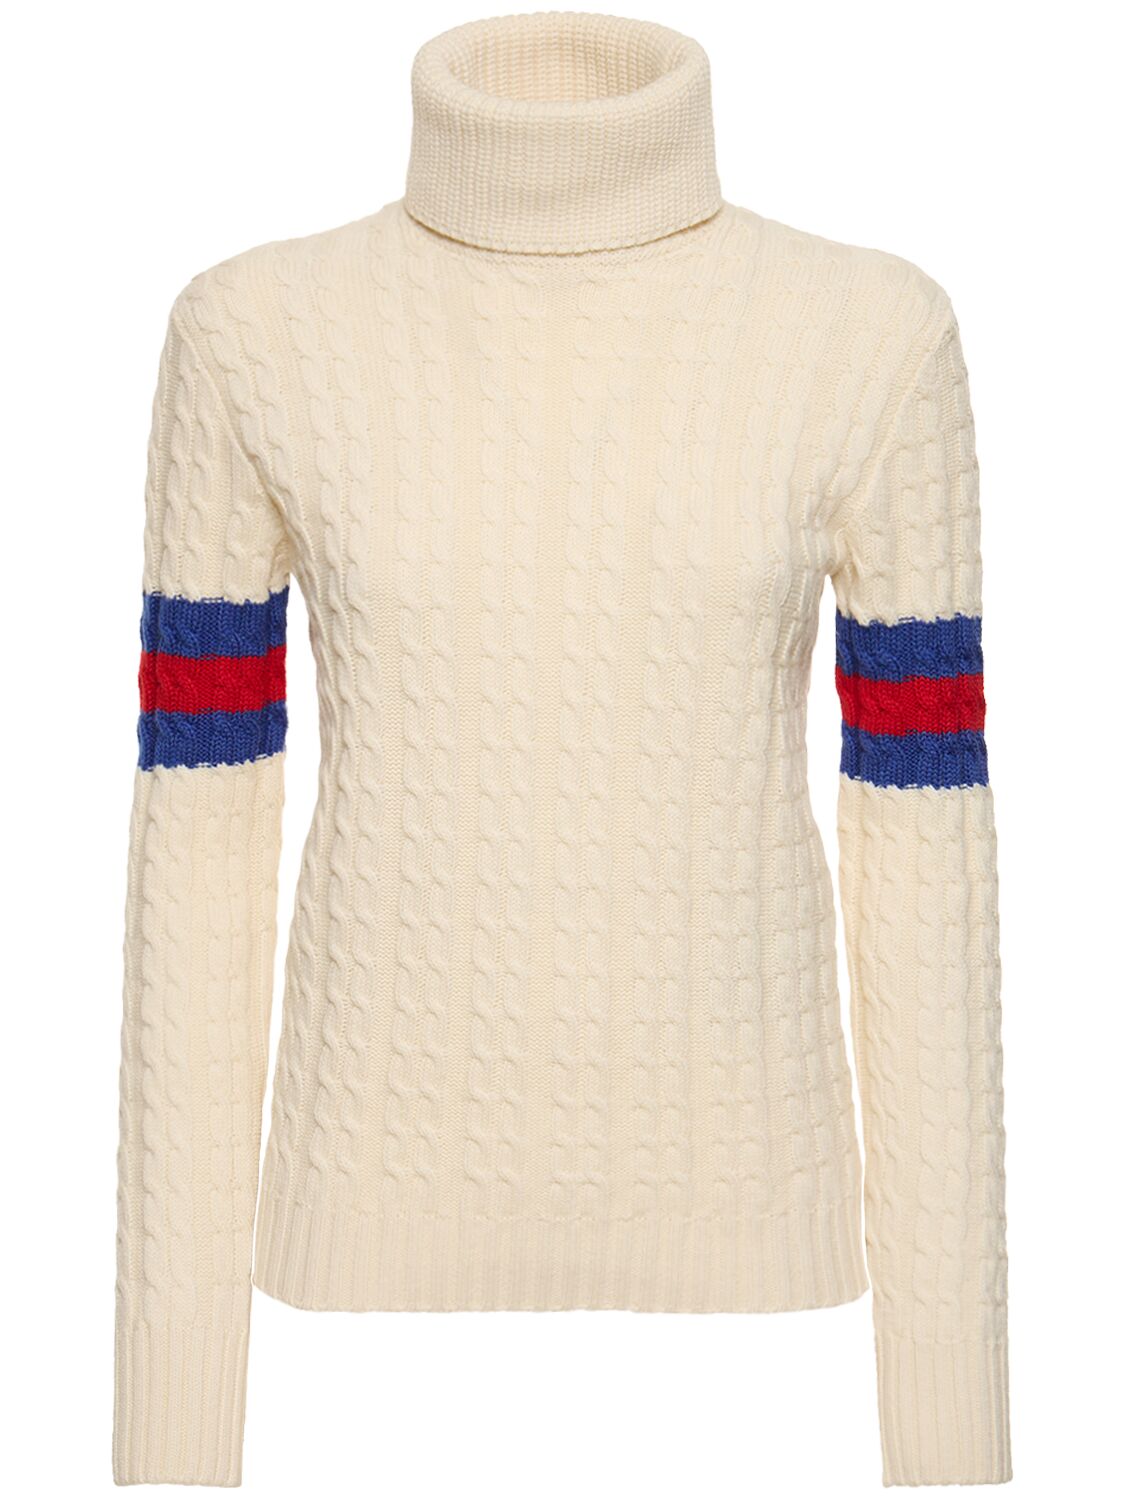 Wool & Cashmere Cable Knit Sweater